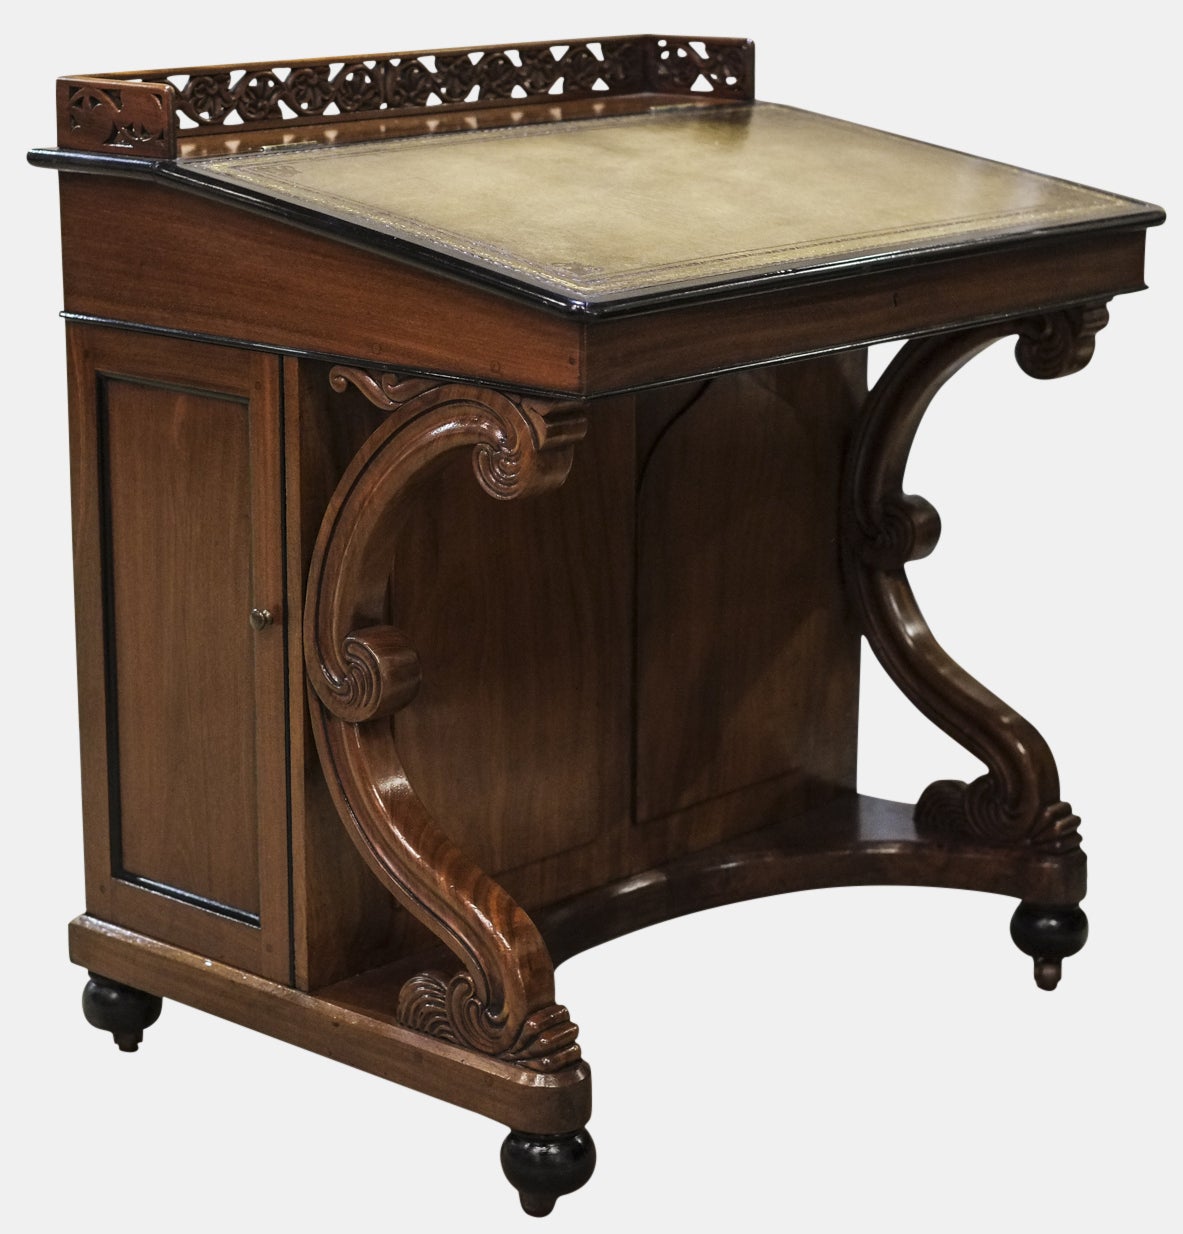  A Superior Quality Maitre D's Station In The Form Of A Well Proportioned Davenport Desk. The Drawers To Both Sides And Desk Section Offer Good Storage, While The Decorative Fretwork Gallery And 'C' Scroll Supports Finish The Aesthetics Perfectly.